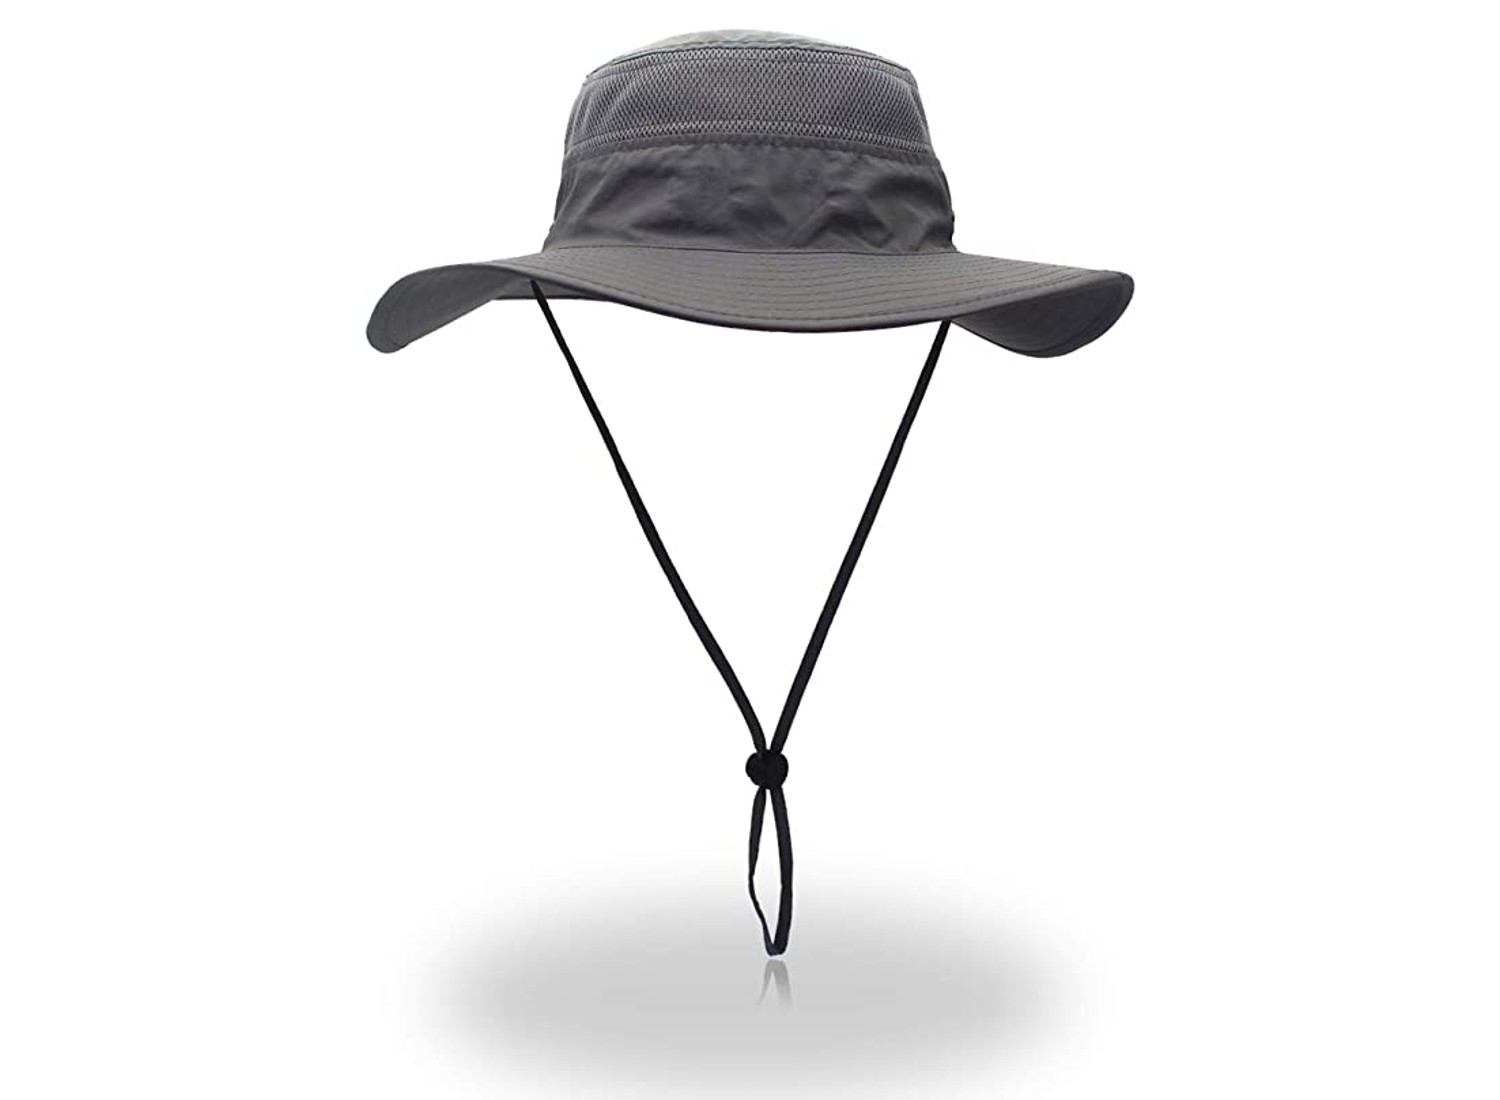 KOOLSOLY Fishing Hat,Sun Cap with UPF 50+ Sun Protection and Neck Flap,for Man and Women Light Grey